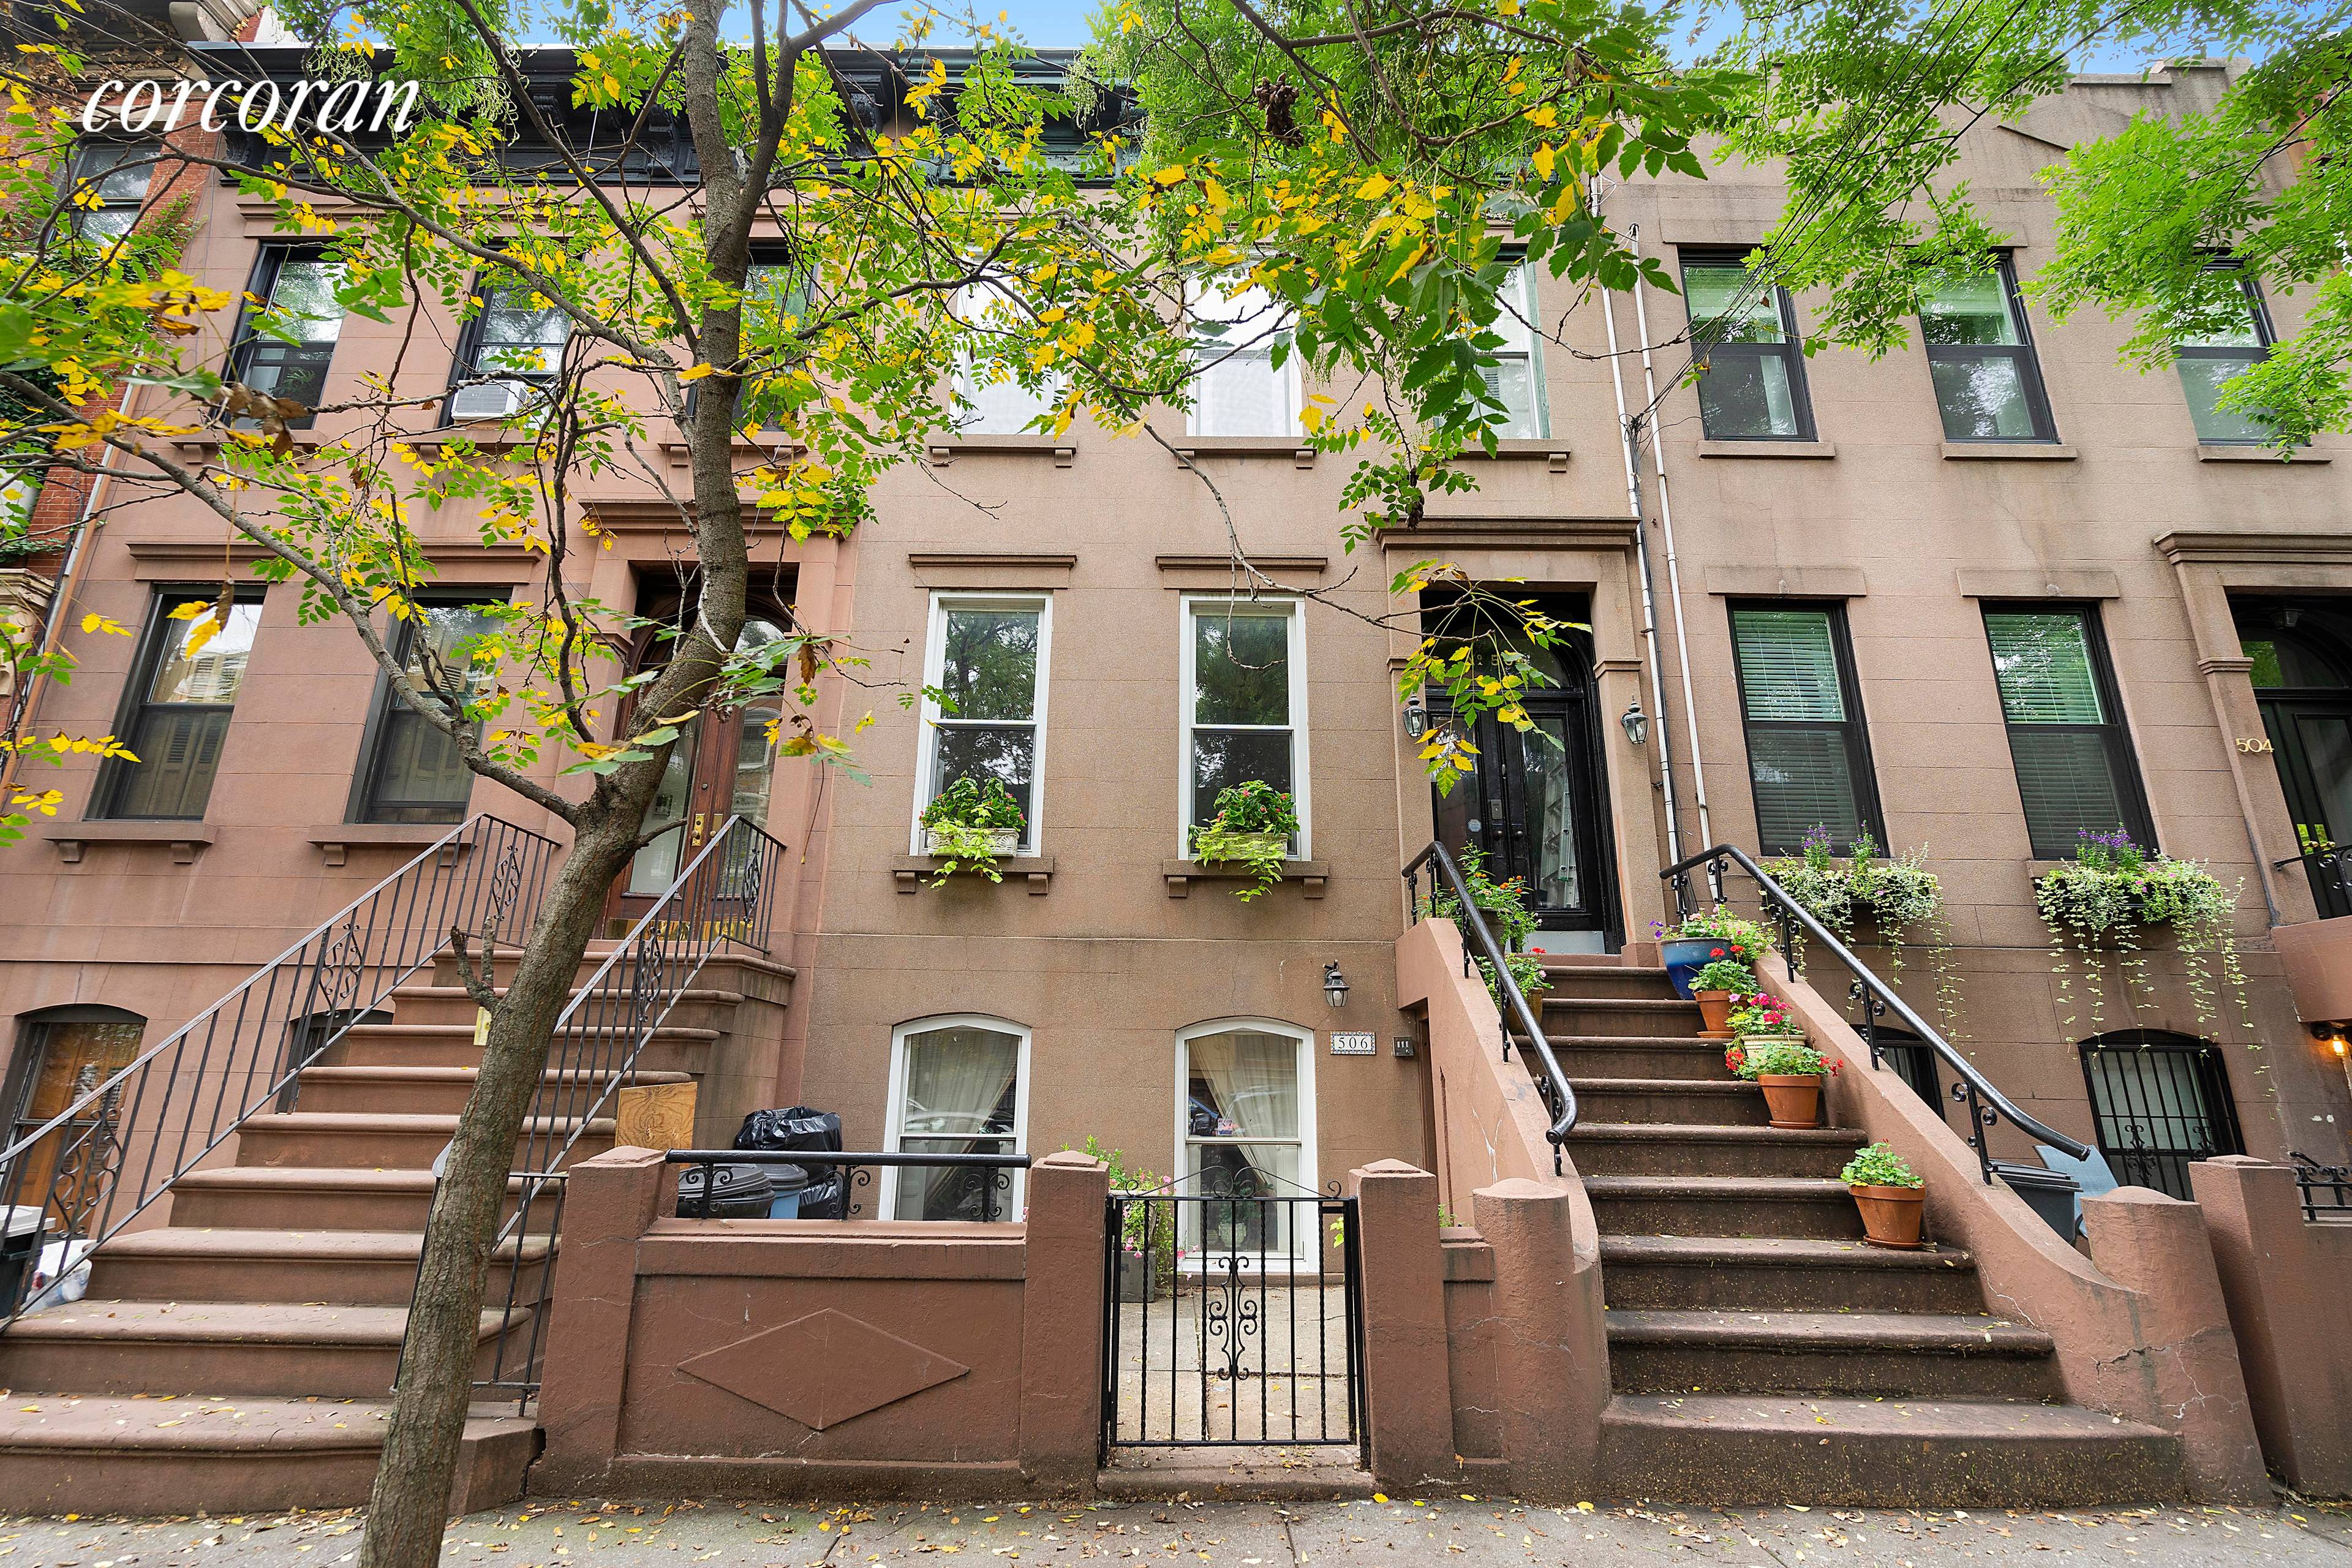 New To The Market ! ! Welcome to 506 Clinton Street, conveniently located in the heart of Carroll Gardens !